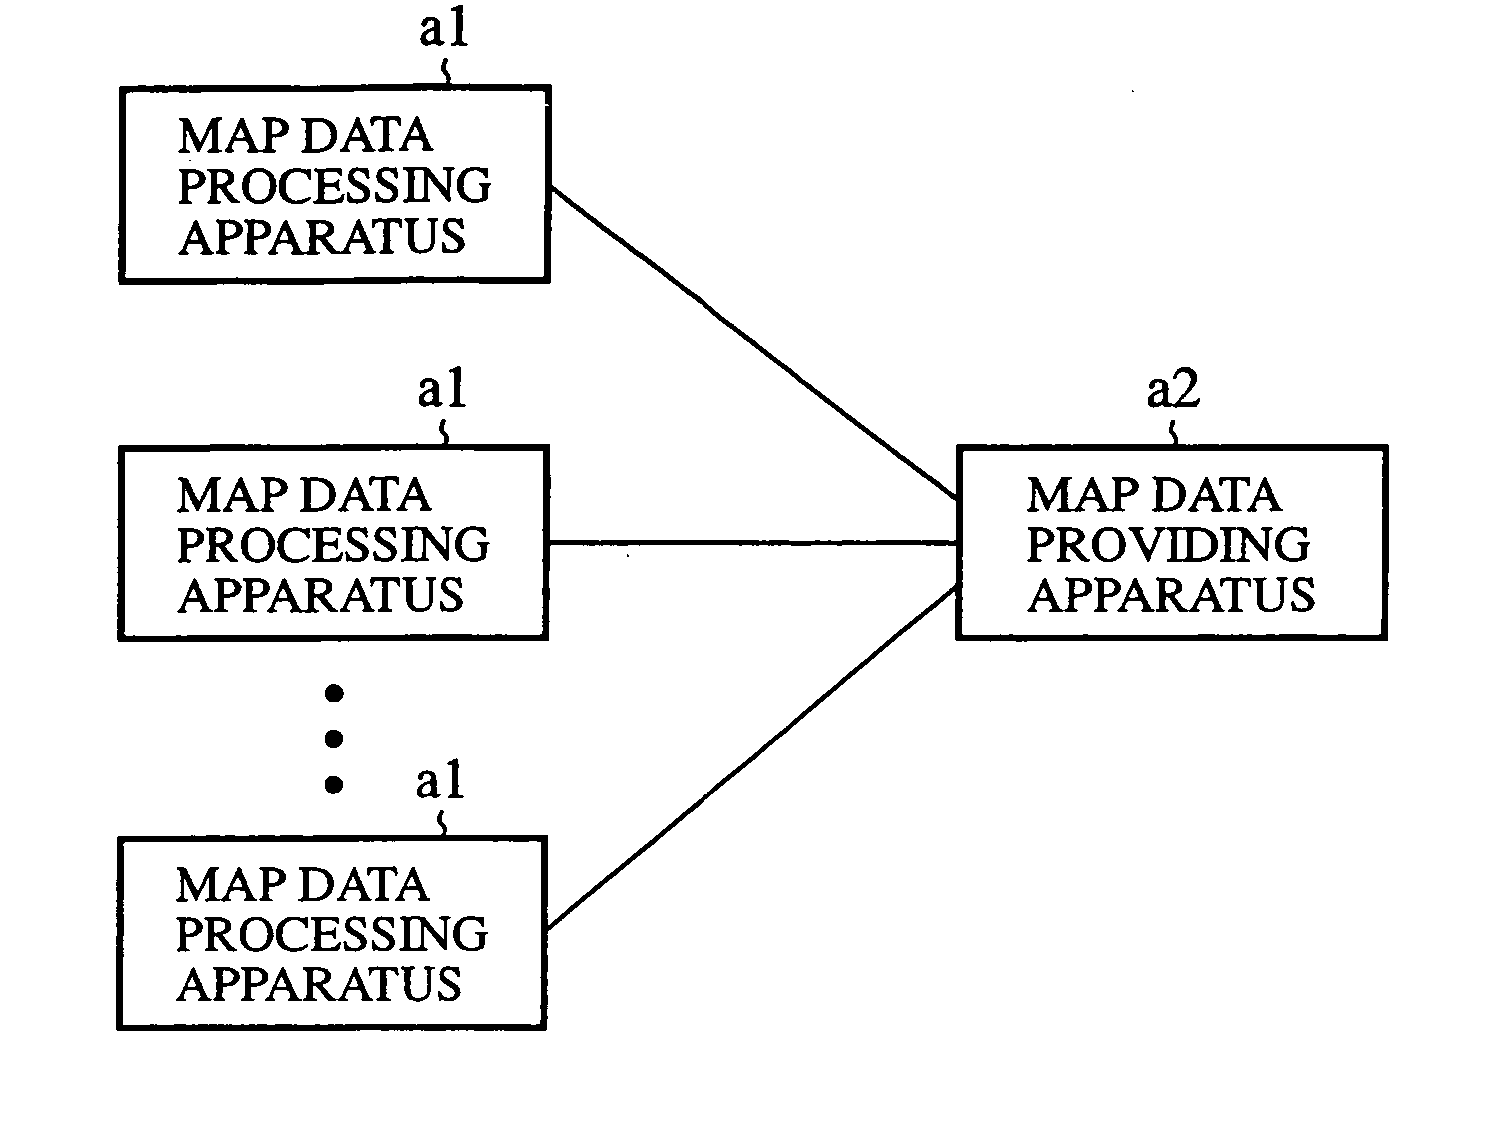 Data architecture of map data, data architecture of update instruction data, map information processing apparatus, and map information providing apparatus